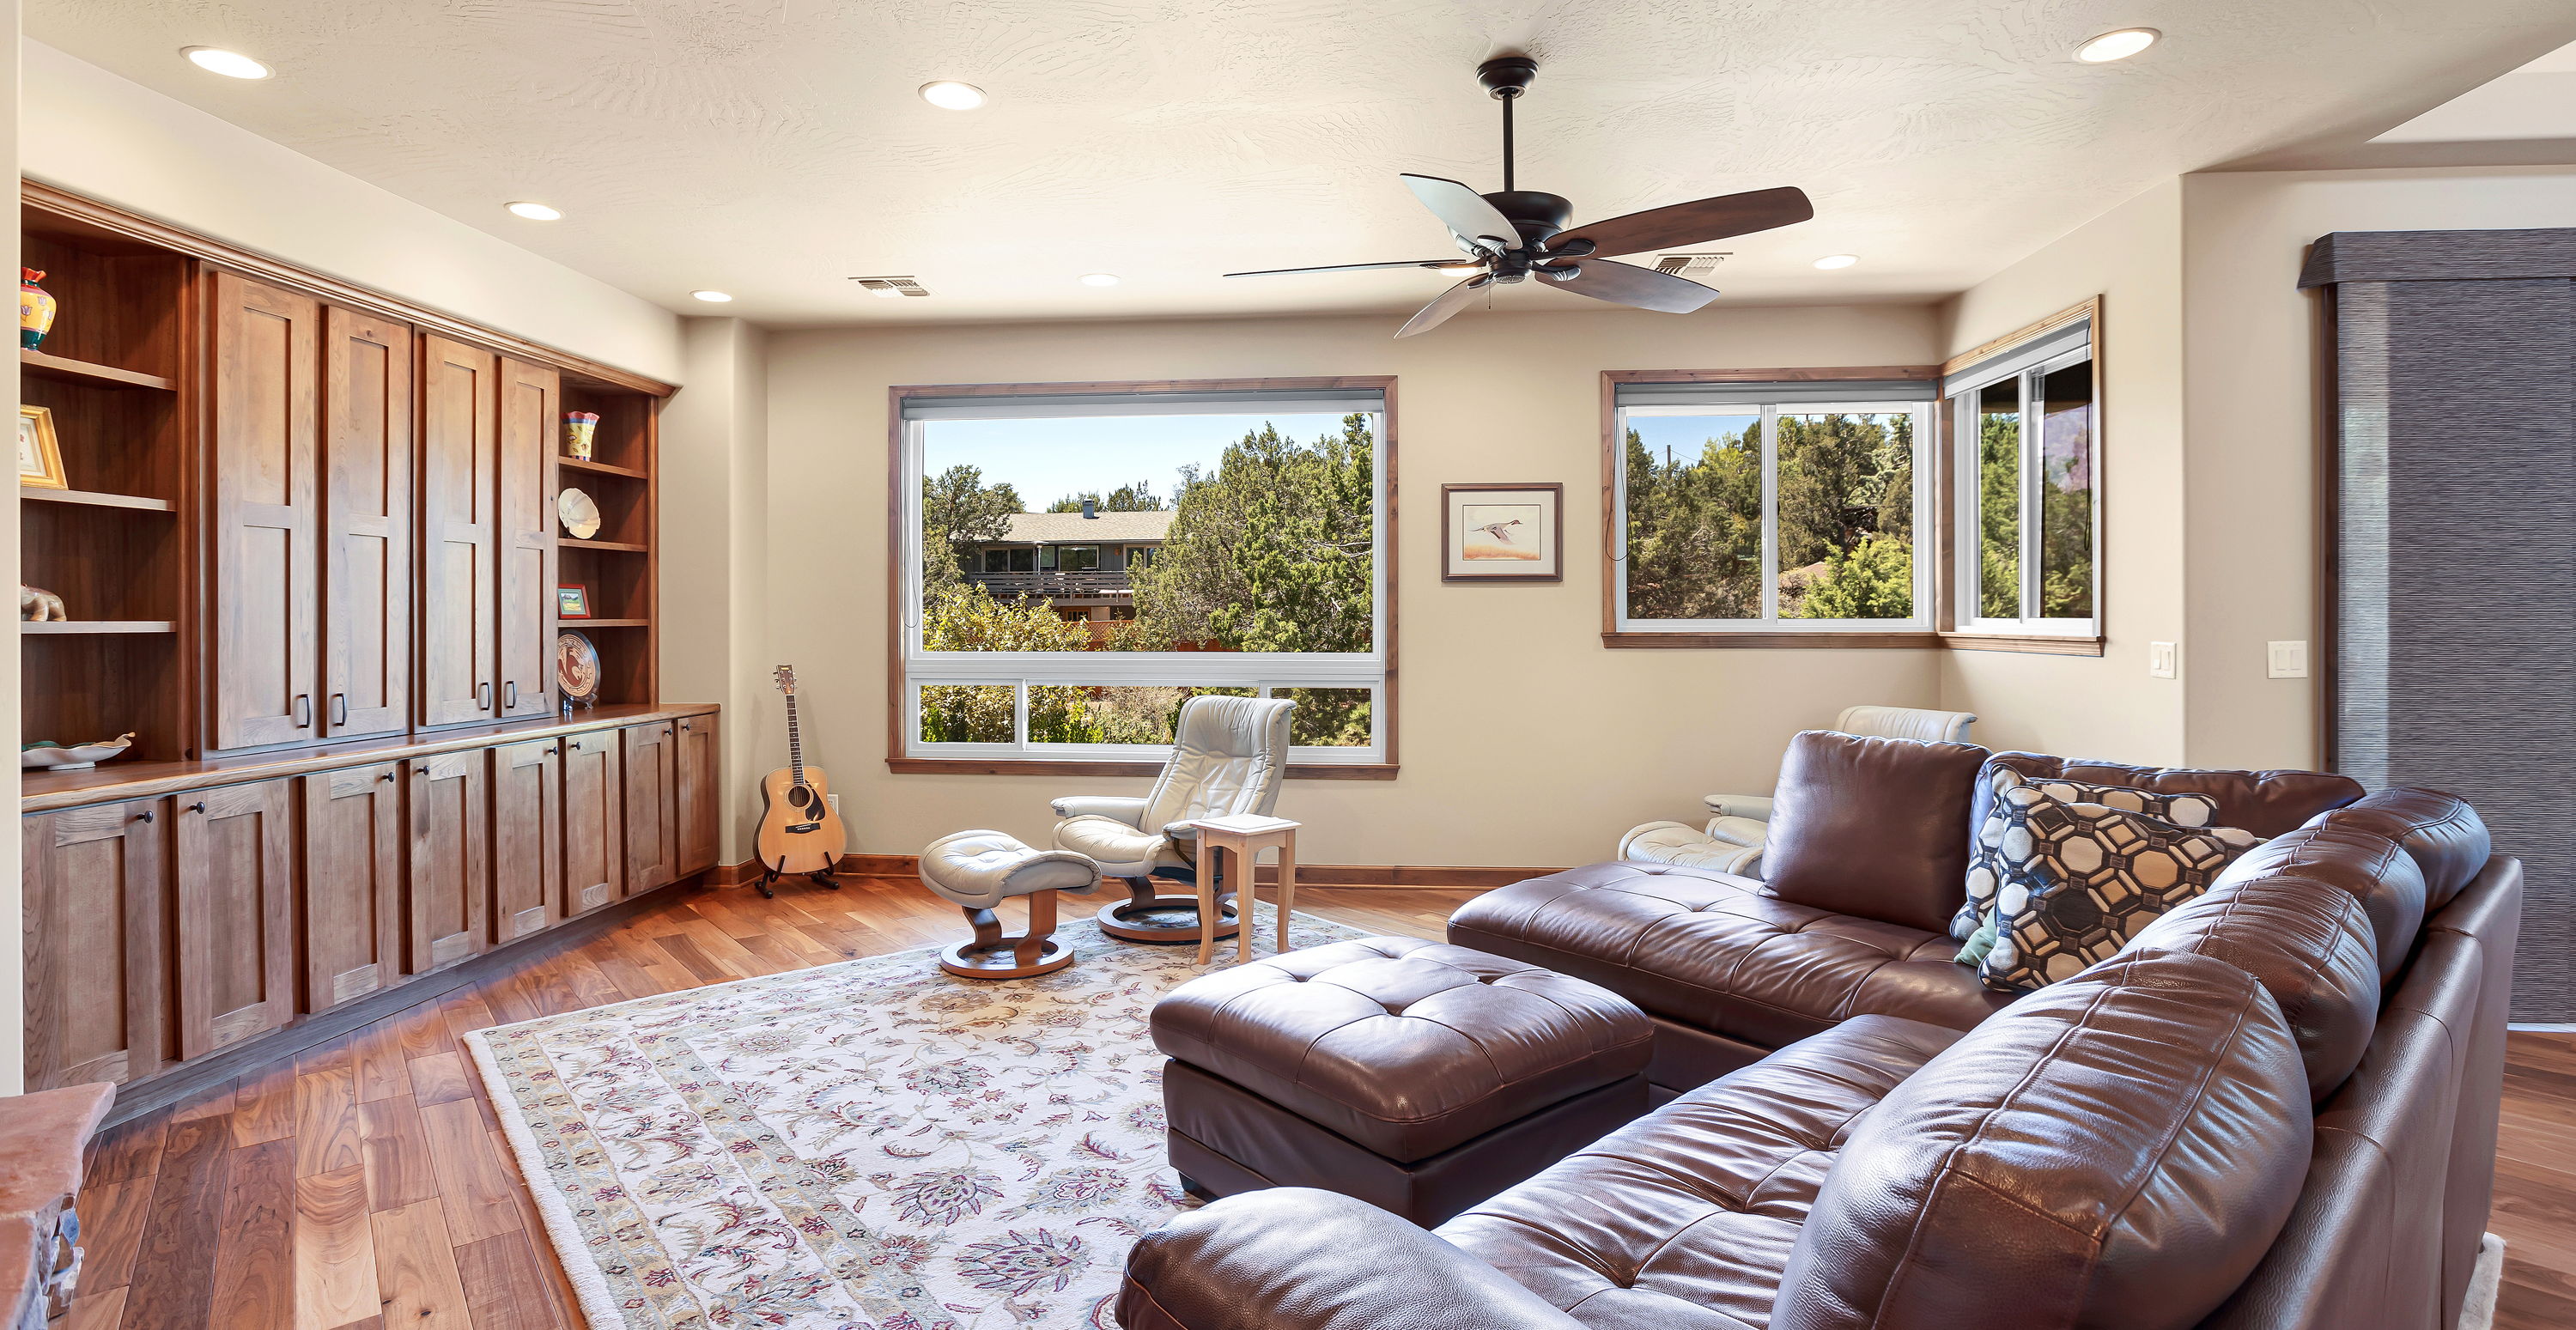 hardwood floored living room featuring a ceiling fan and natural light